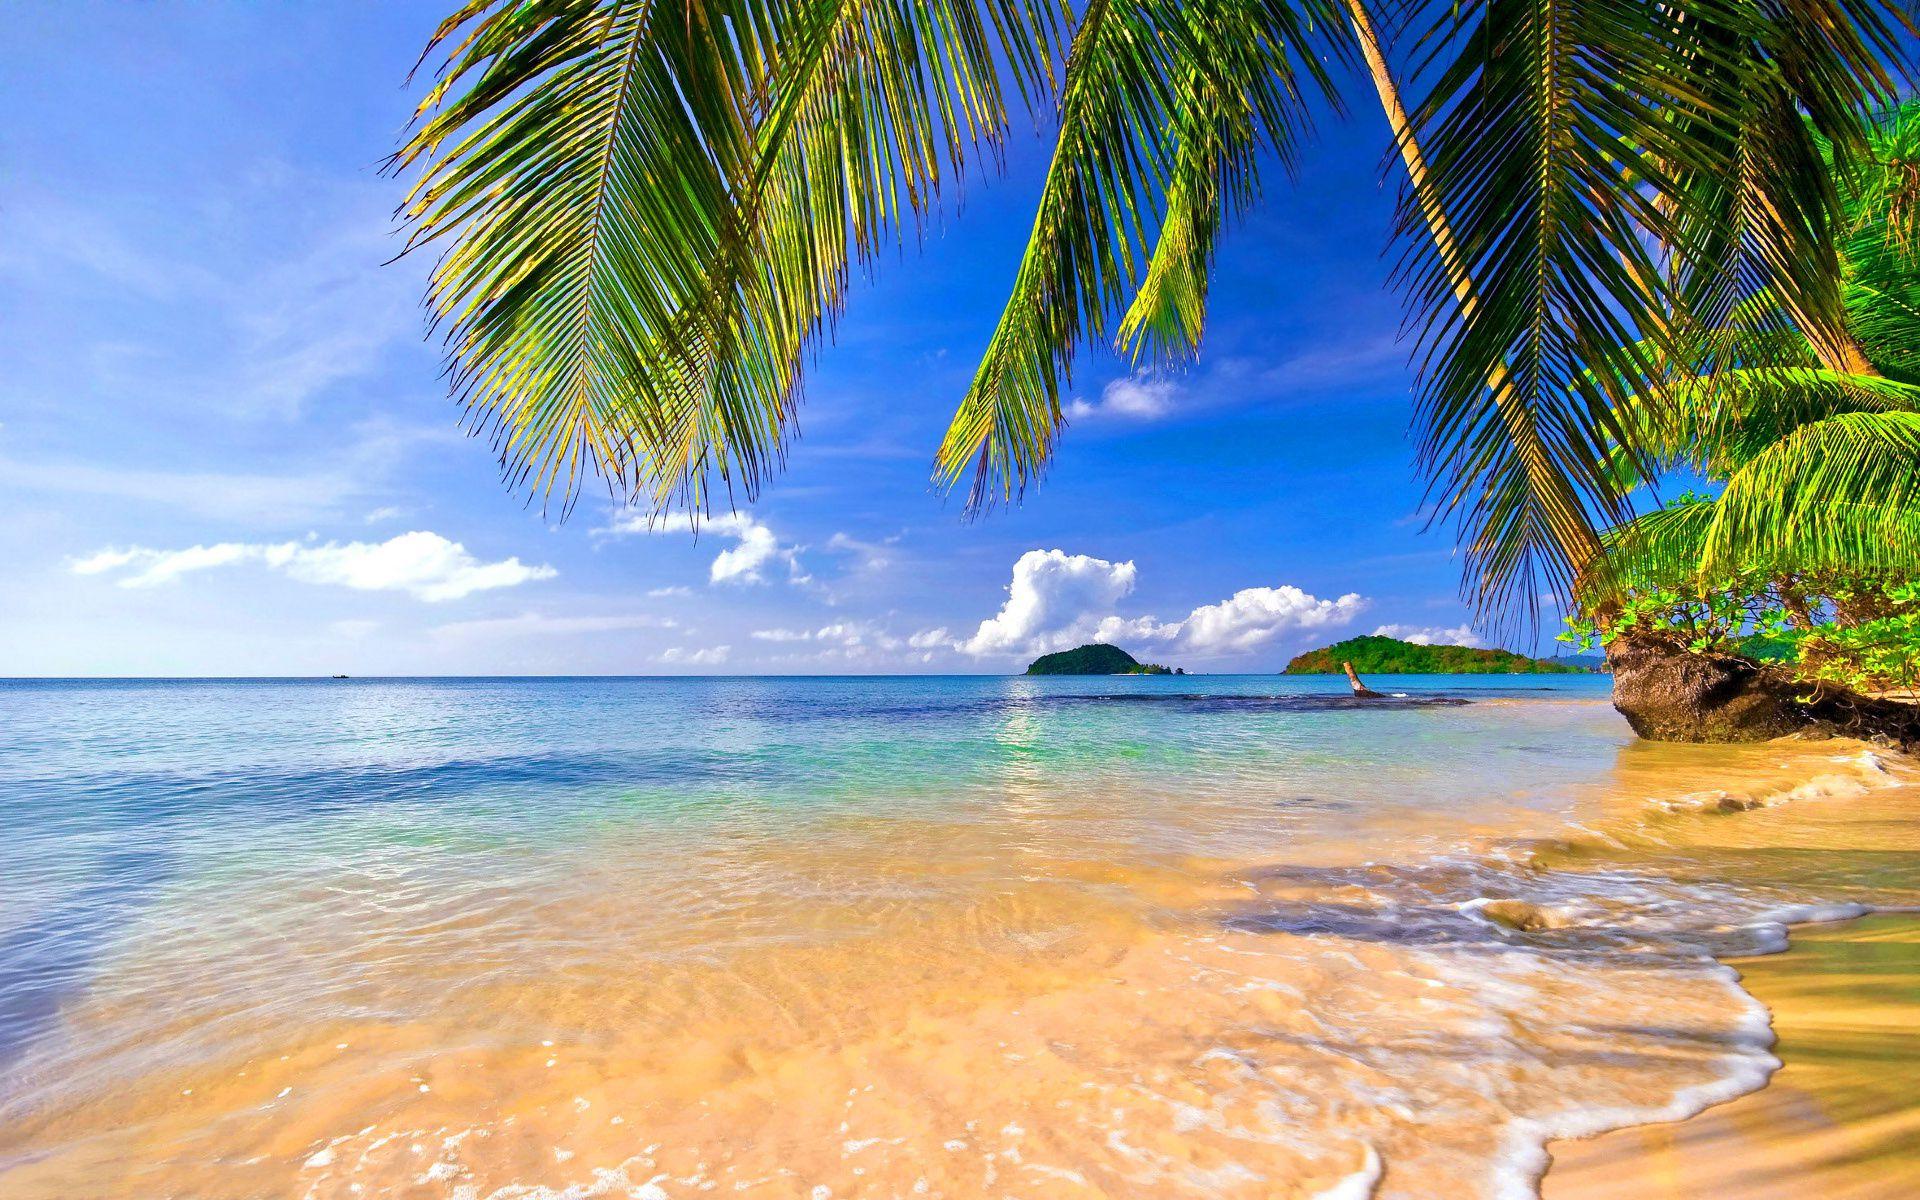 Tropical Beach Wallpapers - Top Free Tropical Beach Backgrounds - WallpaperAccess